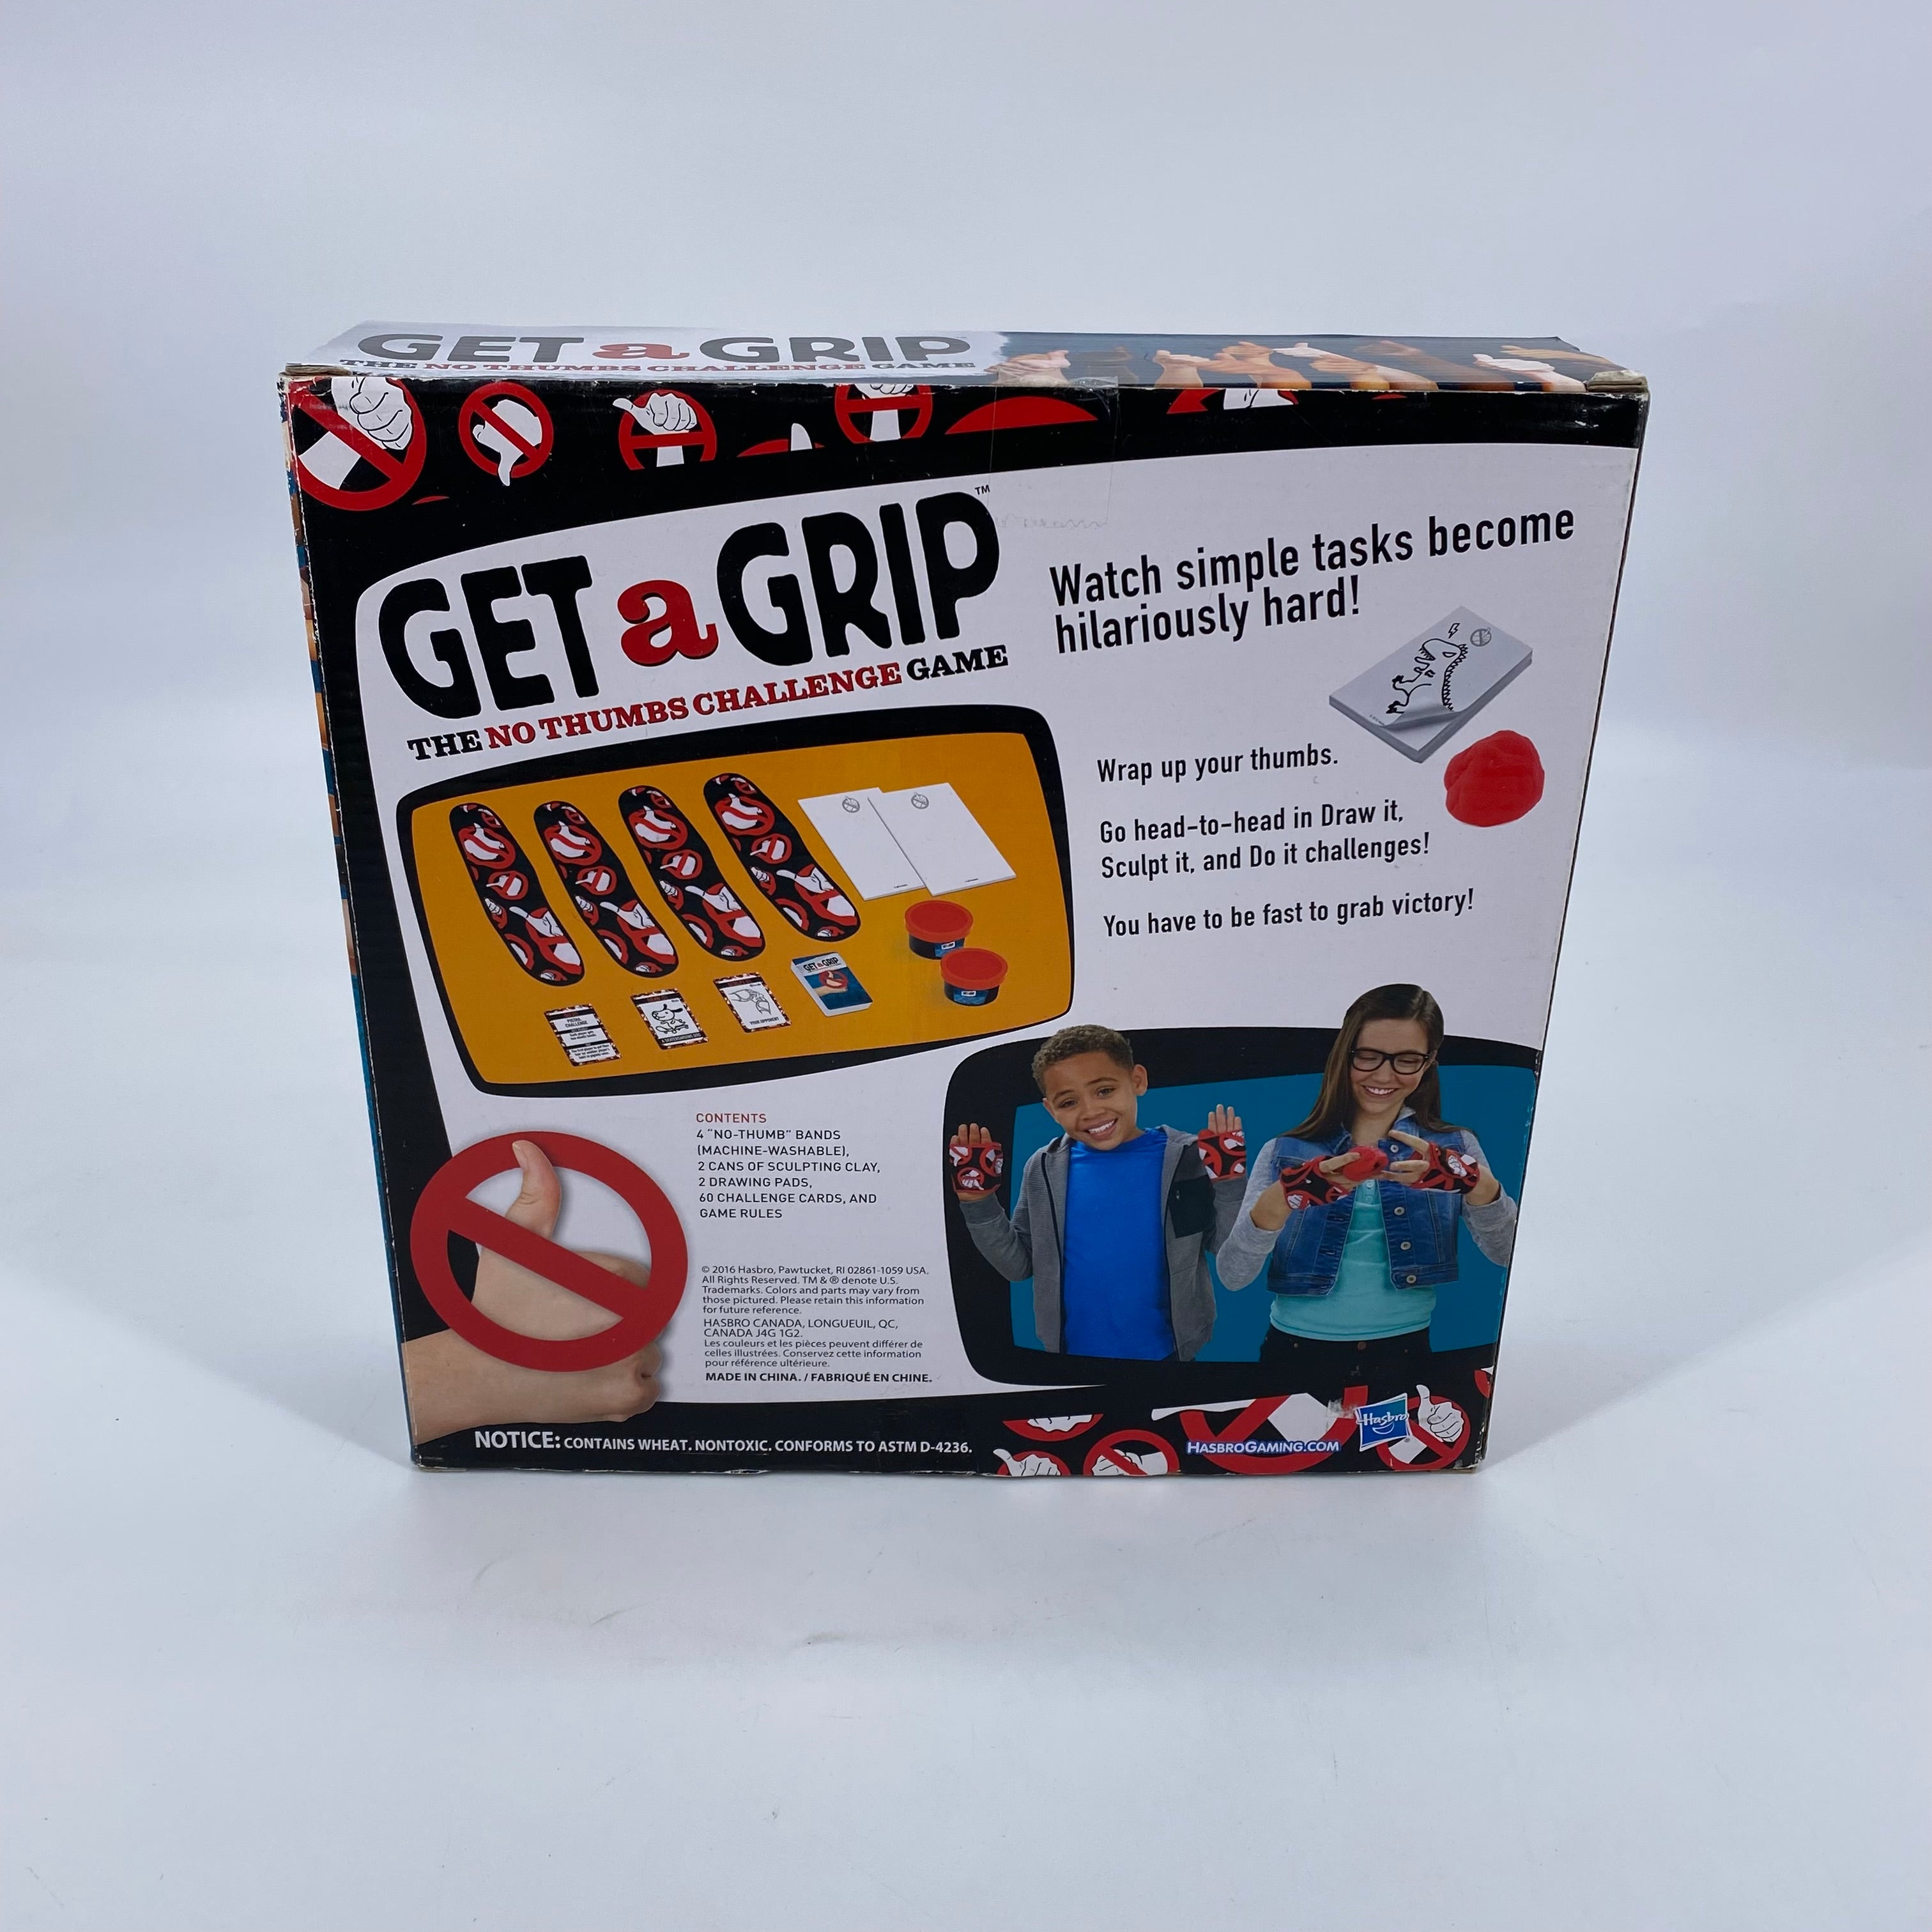 Get a grip - The no thumbs challenge game- Édition 2016